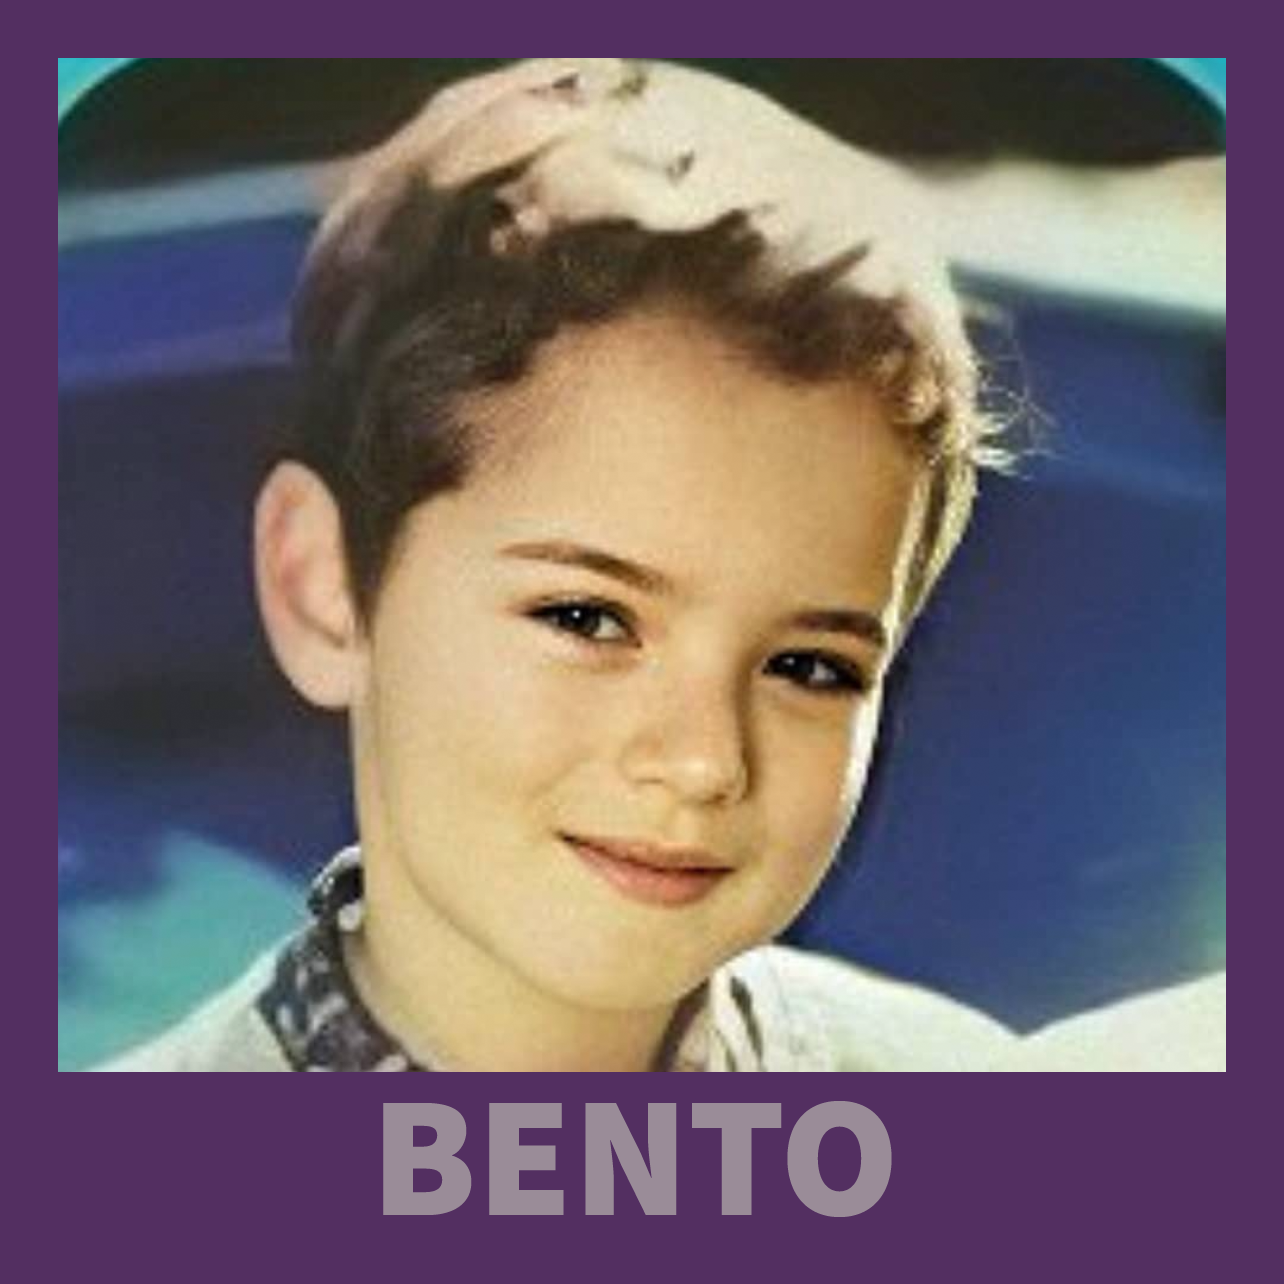 https://static.wikia.nocookie.net/chiquititas/images/9/9f/BENTO.png/revision/latest?cb=20220902010346